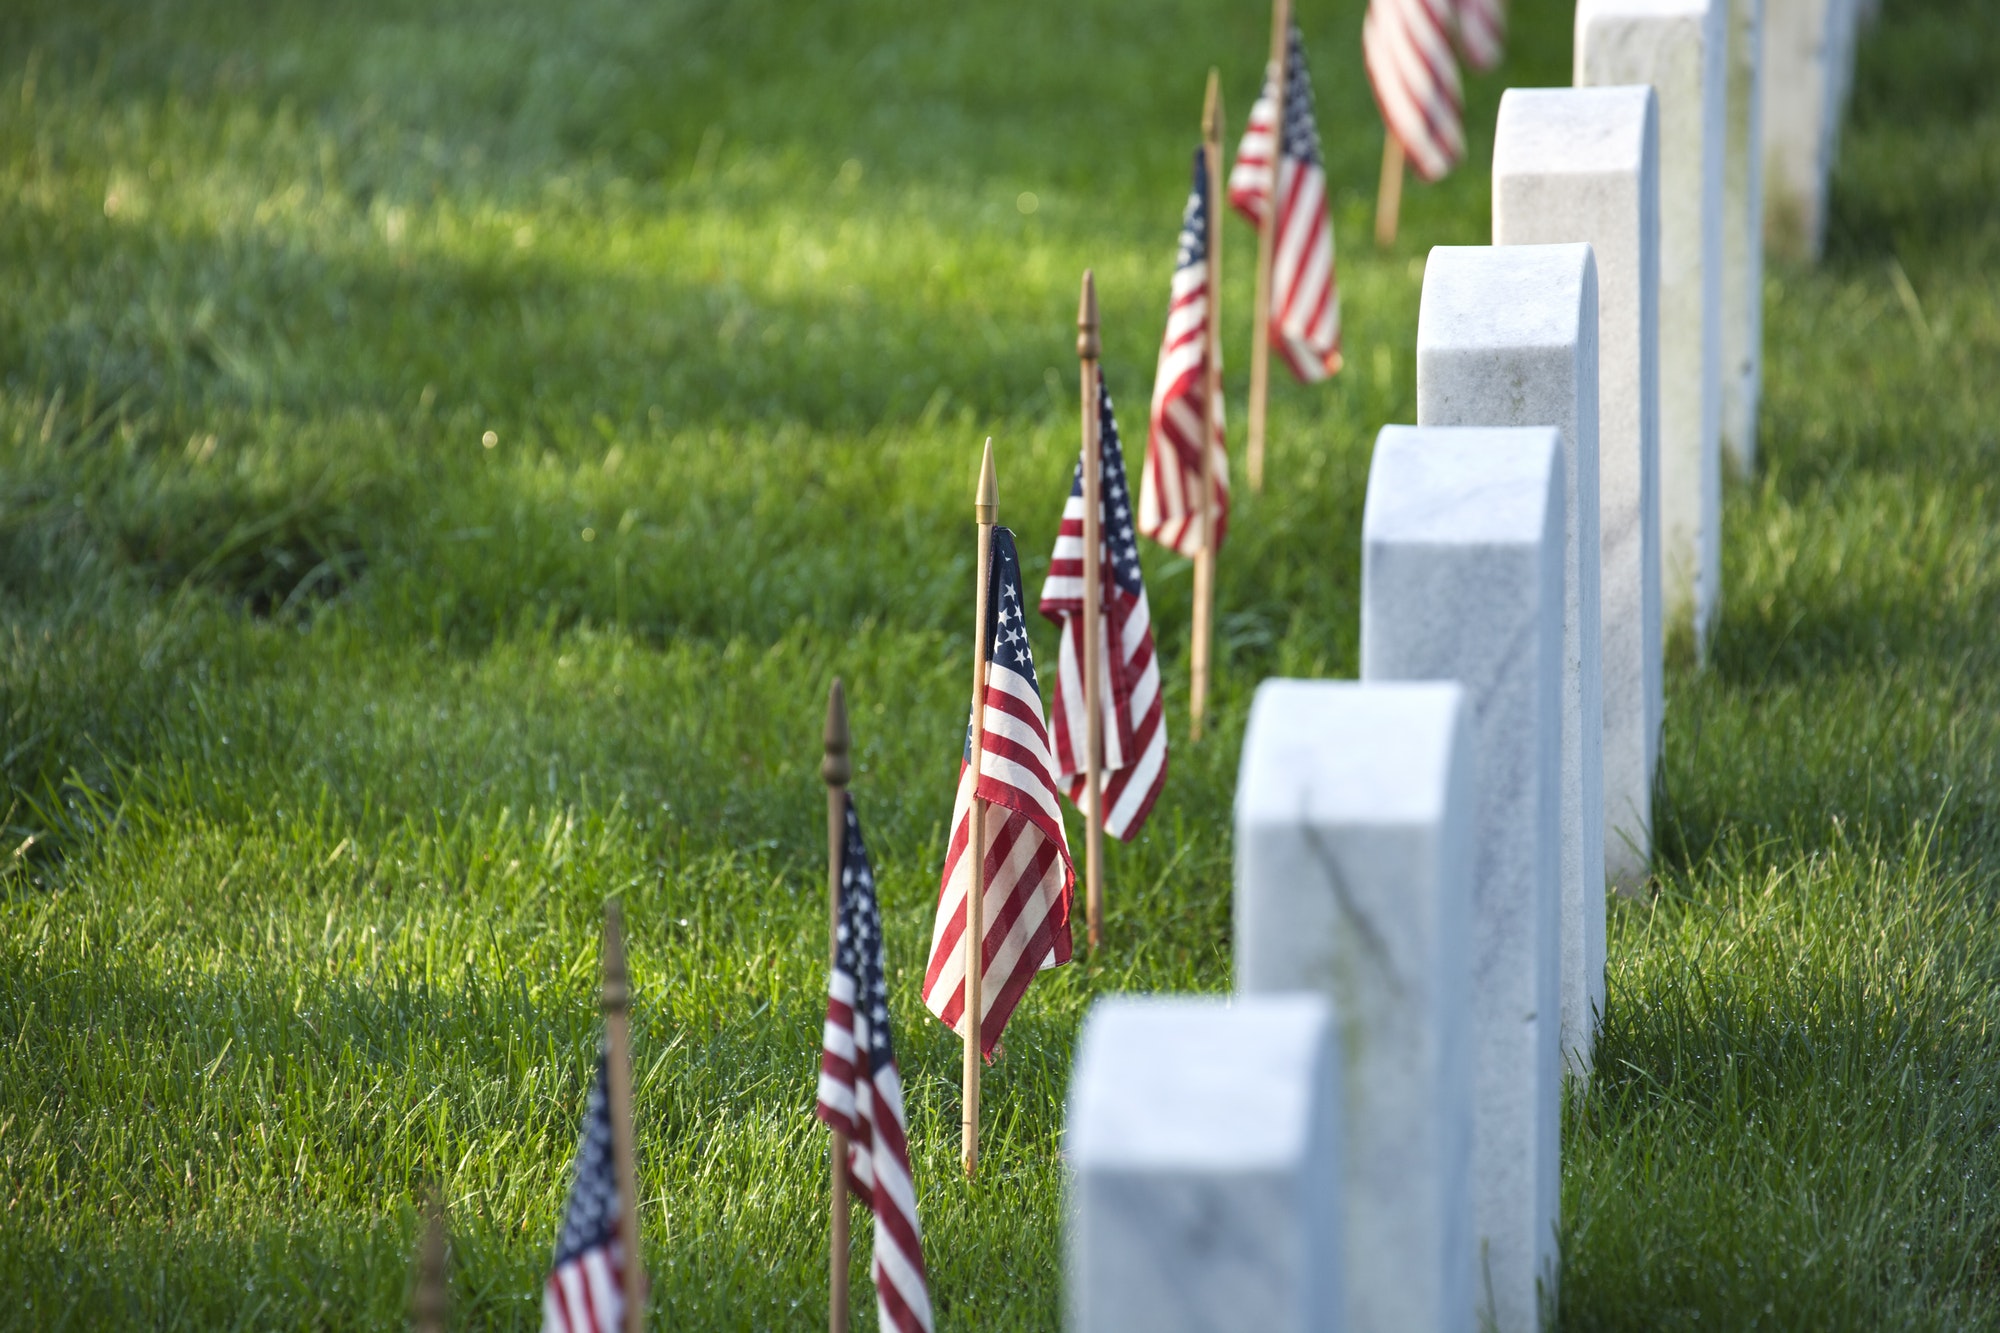 Memorial Day (City Holiday) – The City of Bessemer